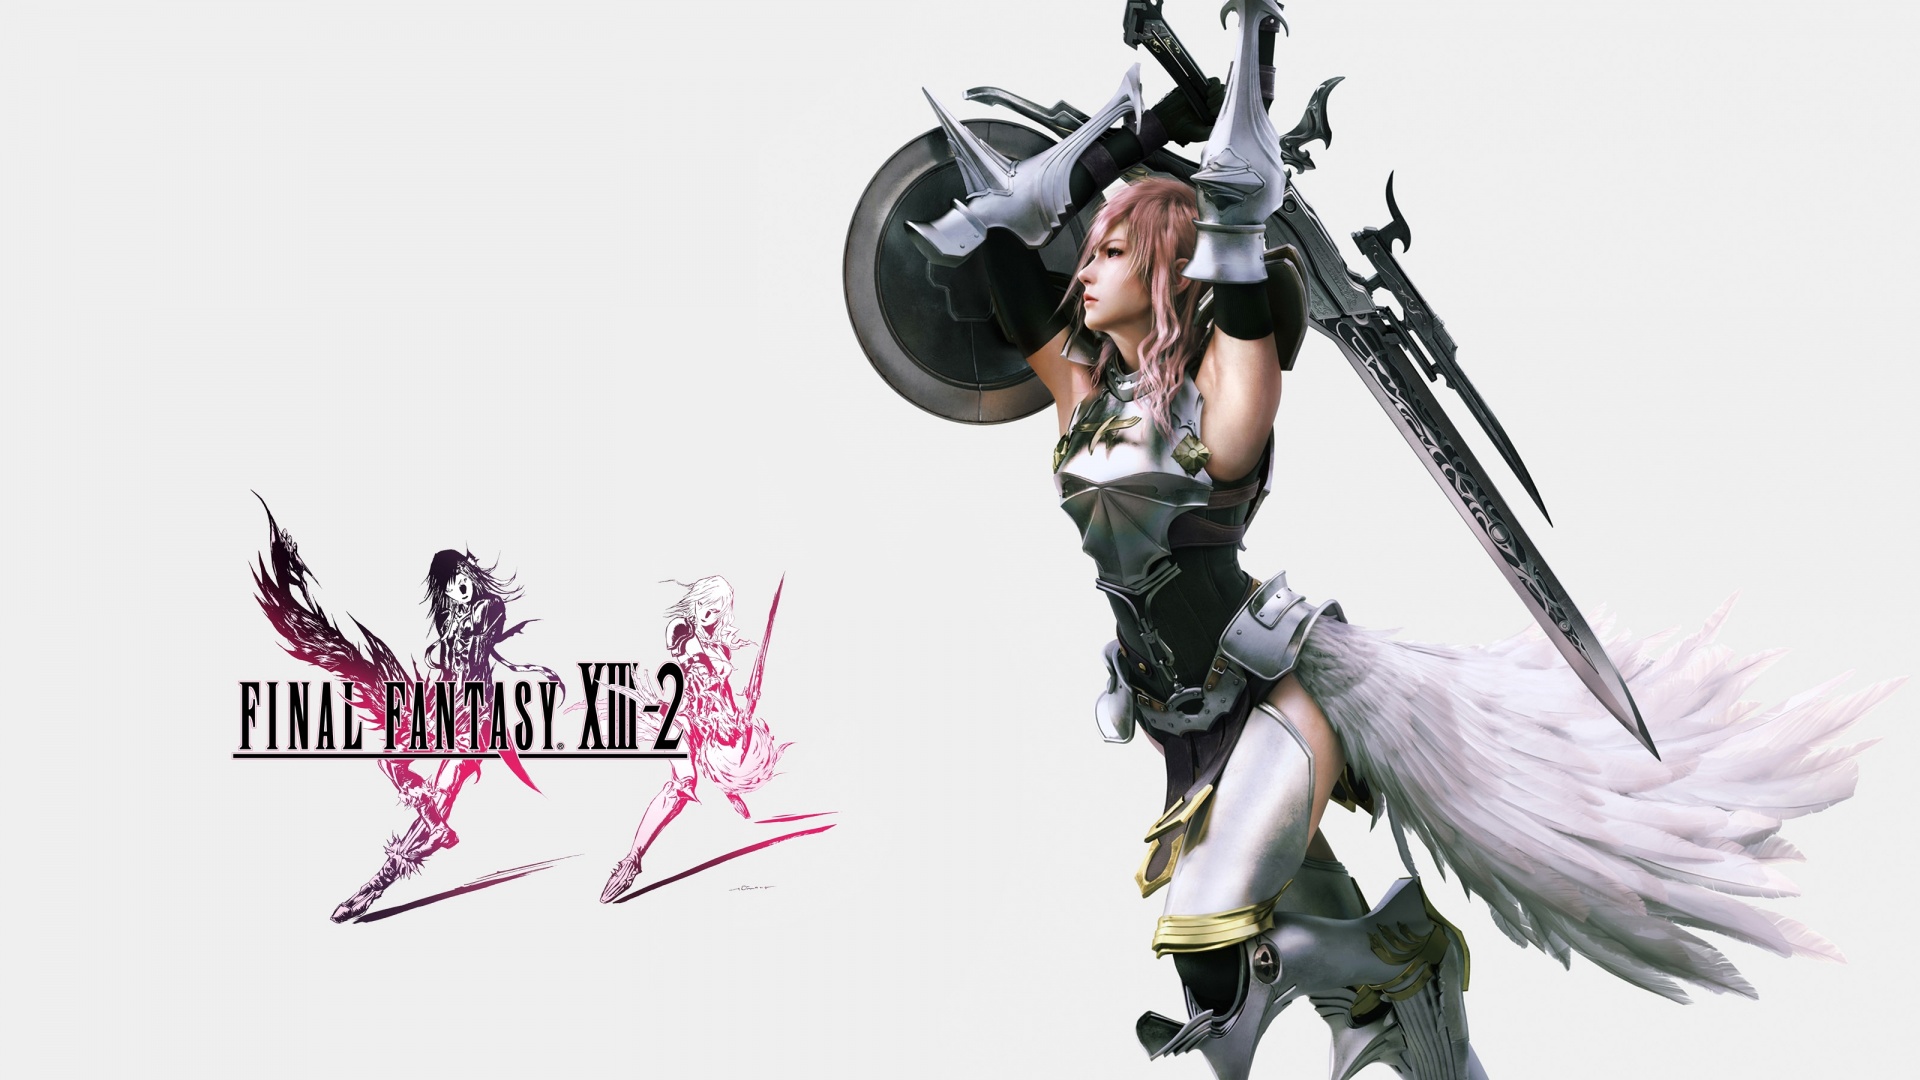 Video Game Final Fantasy XIII-2 HD Wallpaper | Background Image